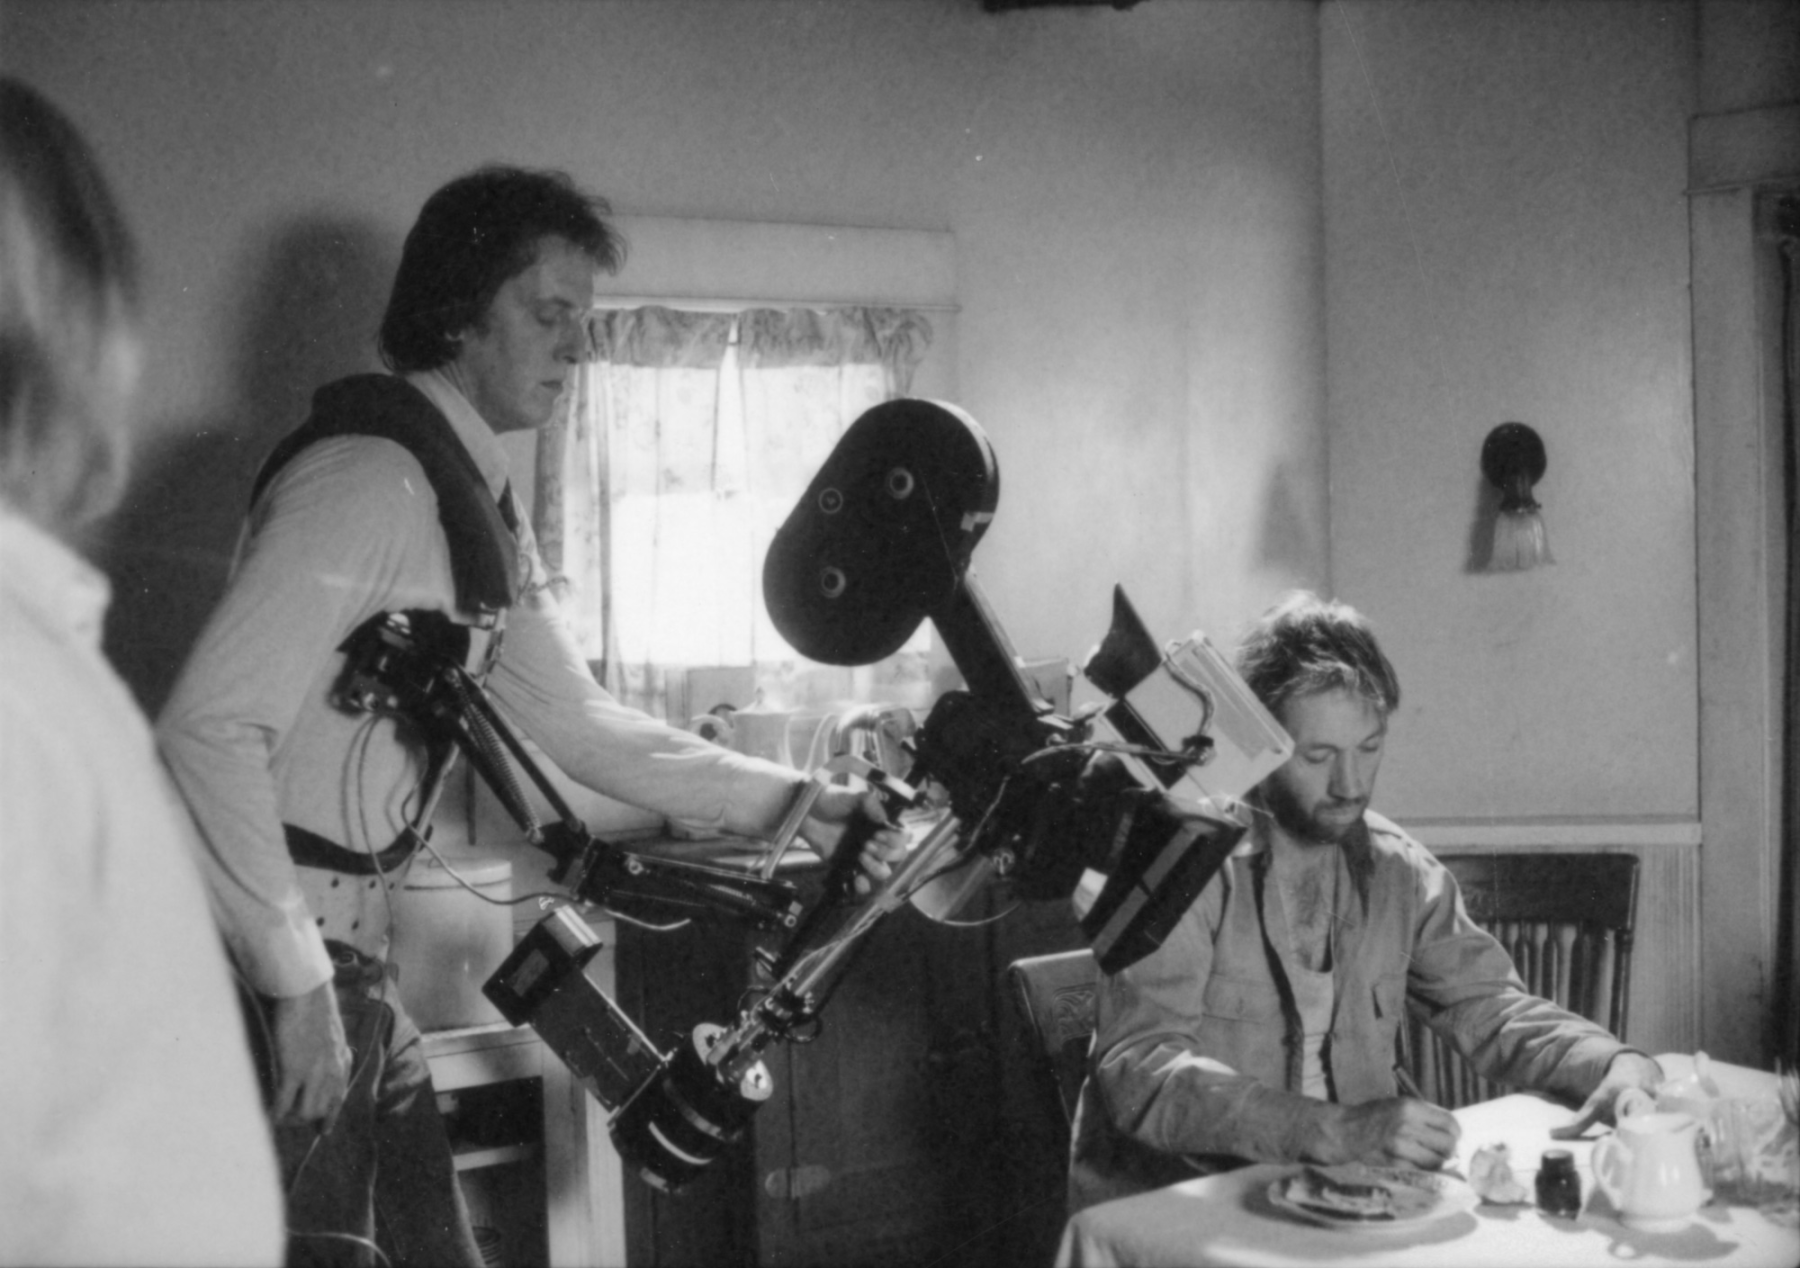 Steadicam operator Garrett Brown, second from left, and David Carradine, right, during production of <i>Bound for Glory</i> (USA, 1976). Metro-Goldwyn-Mayer/UA photographs, Margaret Herrick Library, Academy of Motion Picture Arts and Sciences.